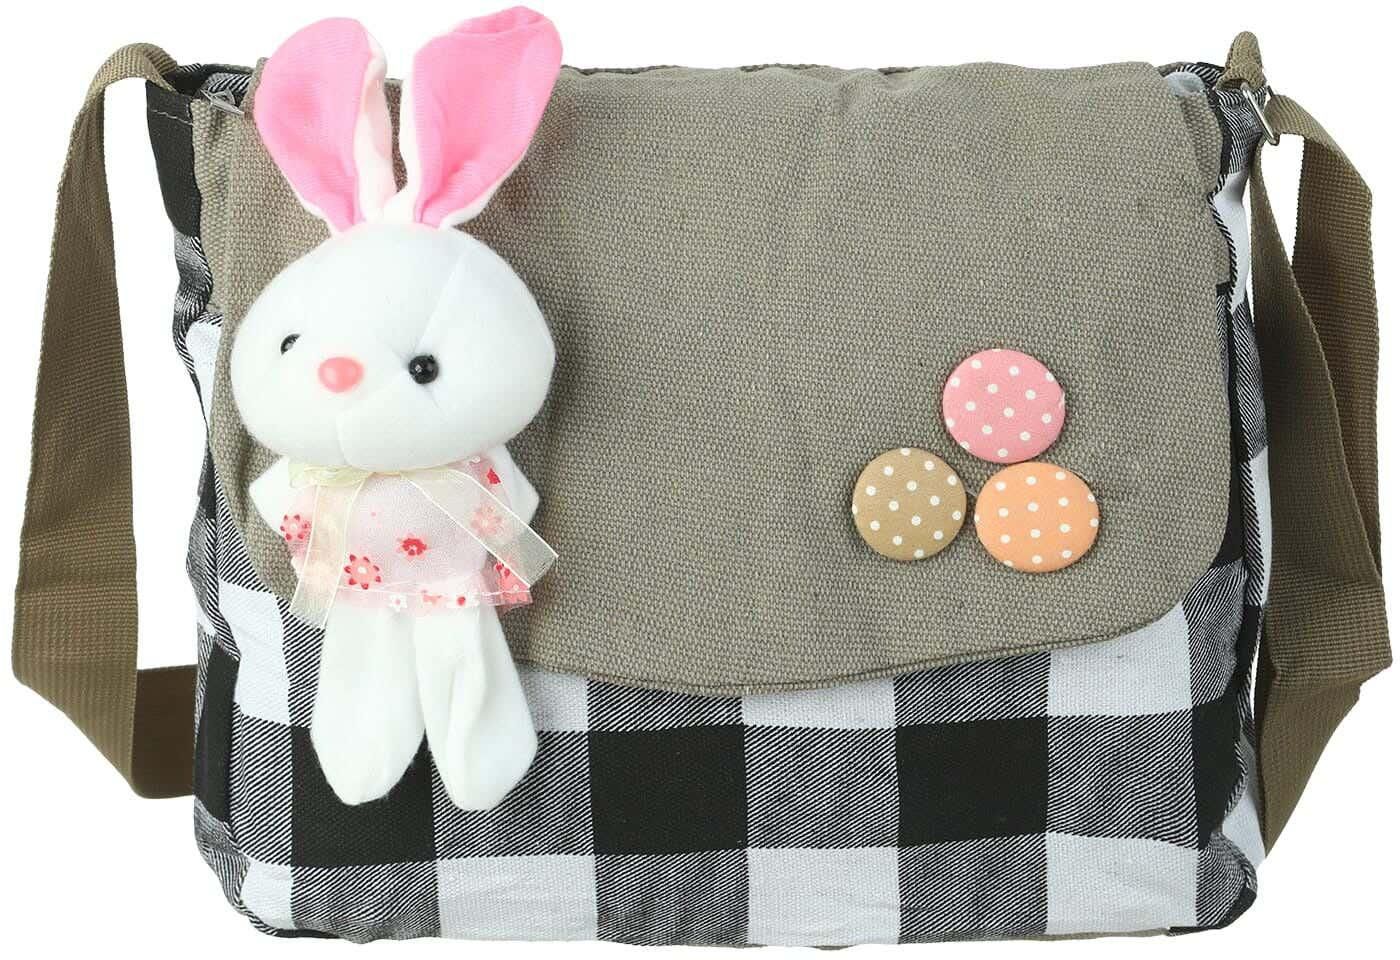 Get Fabric Shoulder Bag Rabbit Shaped for Girls, 1 Zipper, 30 cm - Multicolor with best offers | Raneen.com